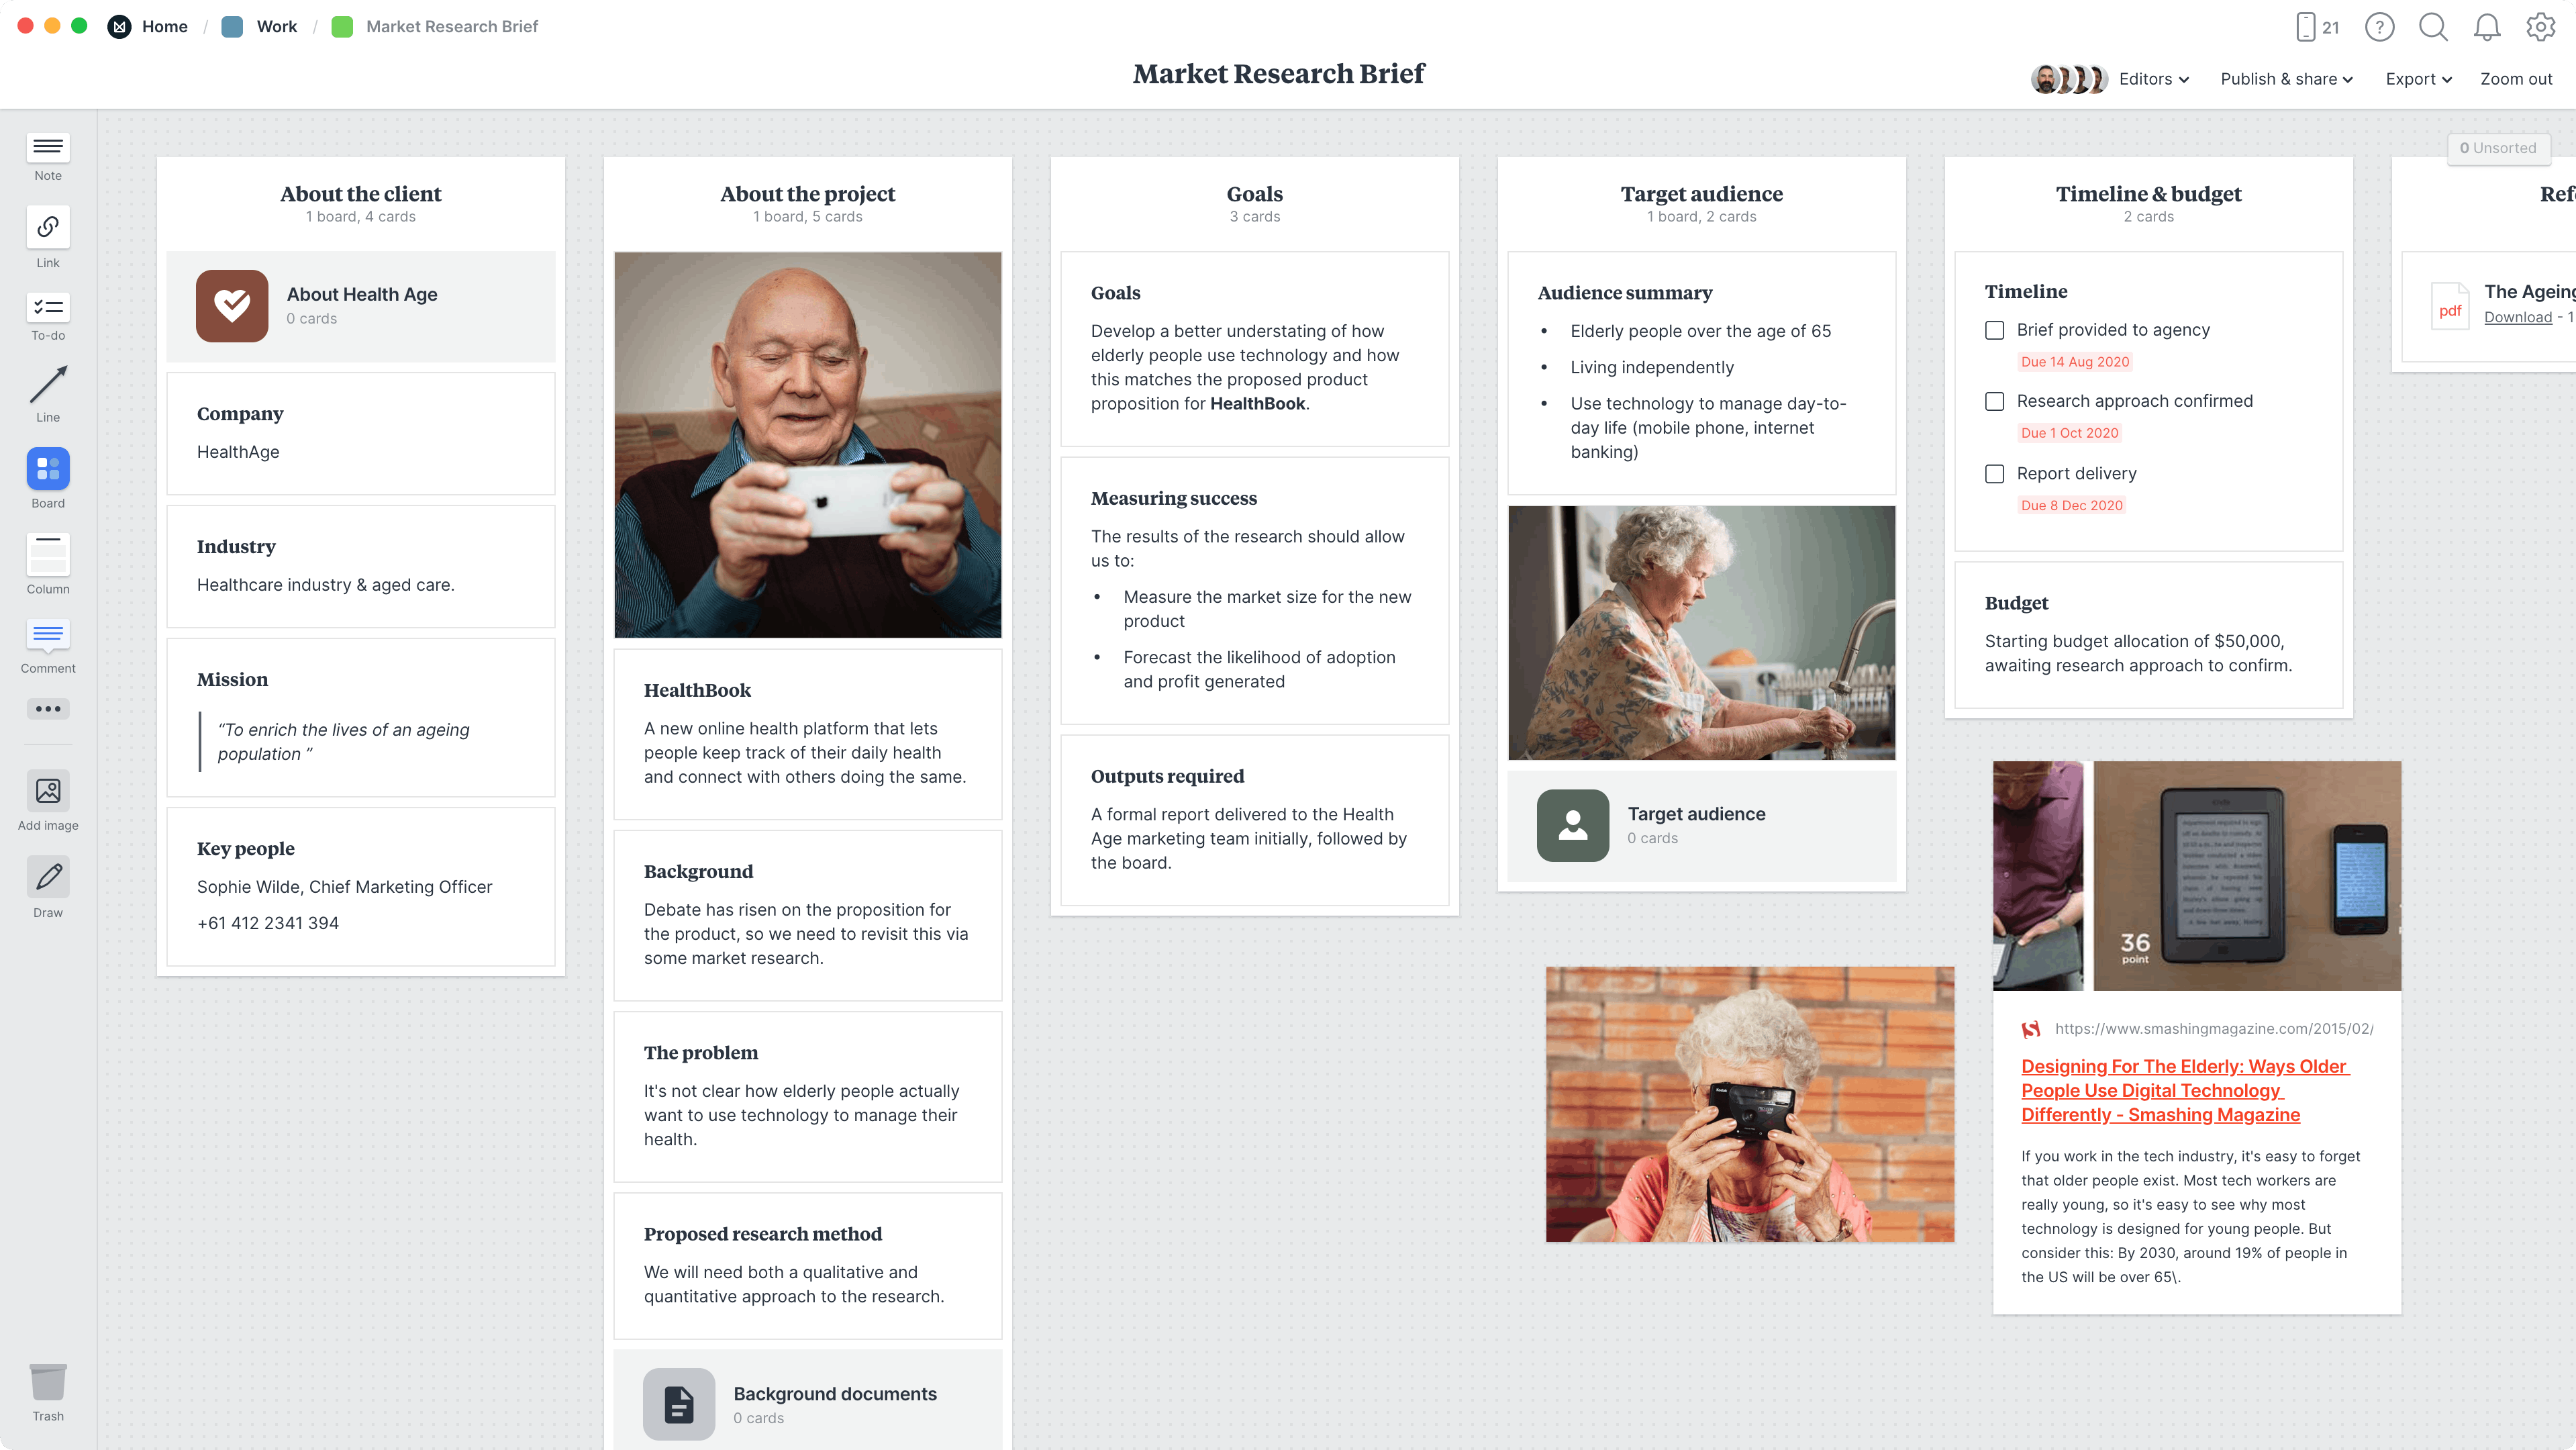 Market Research Brief Template, within the Milanote app